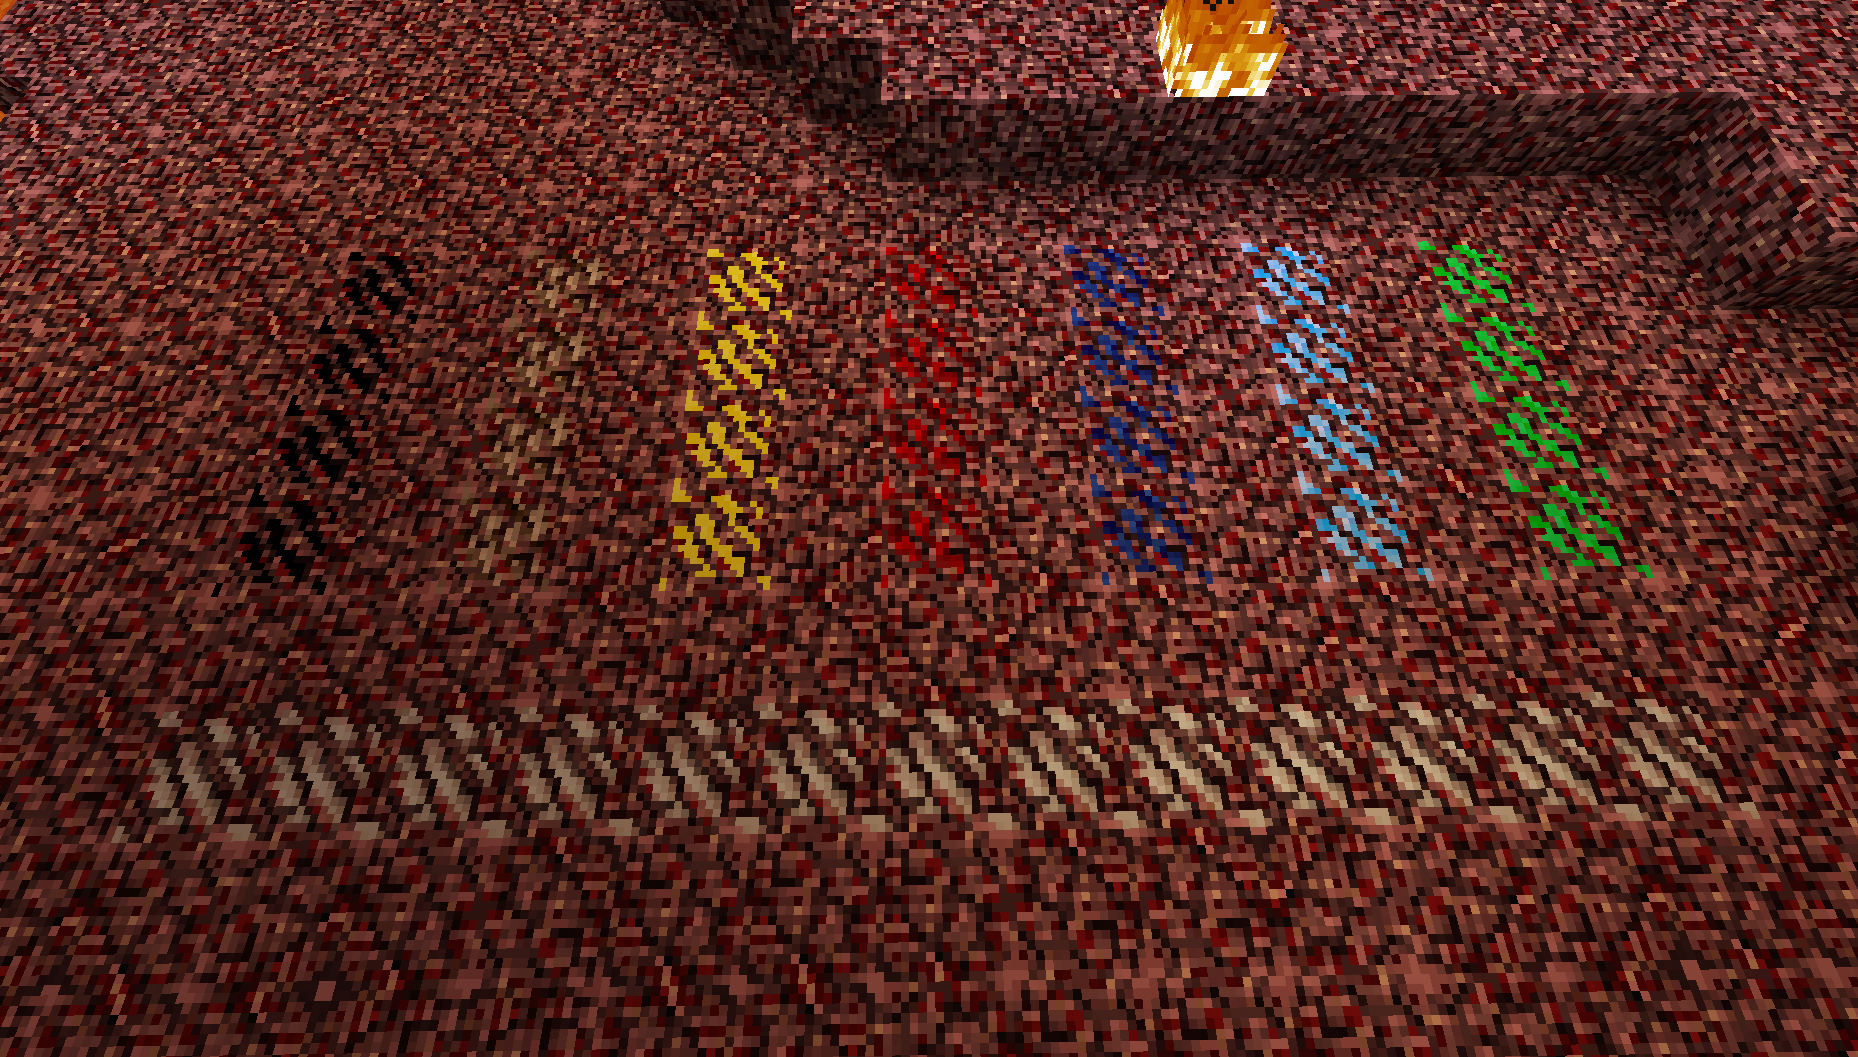 Nether ores